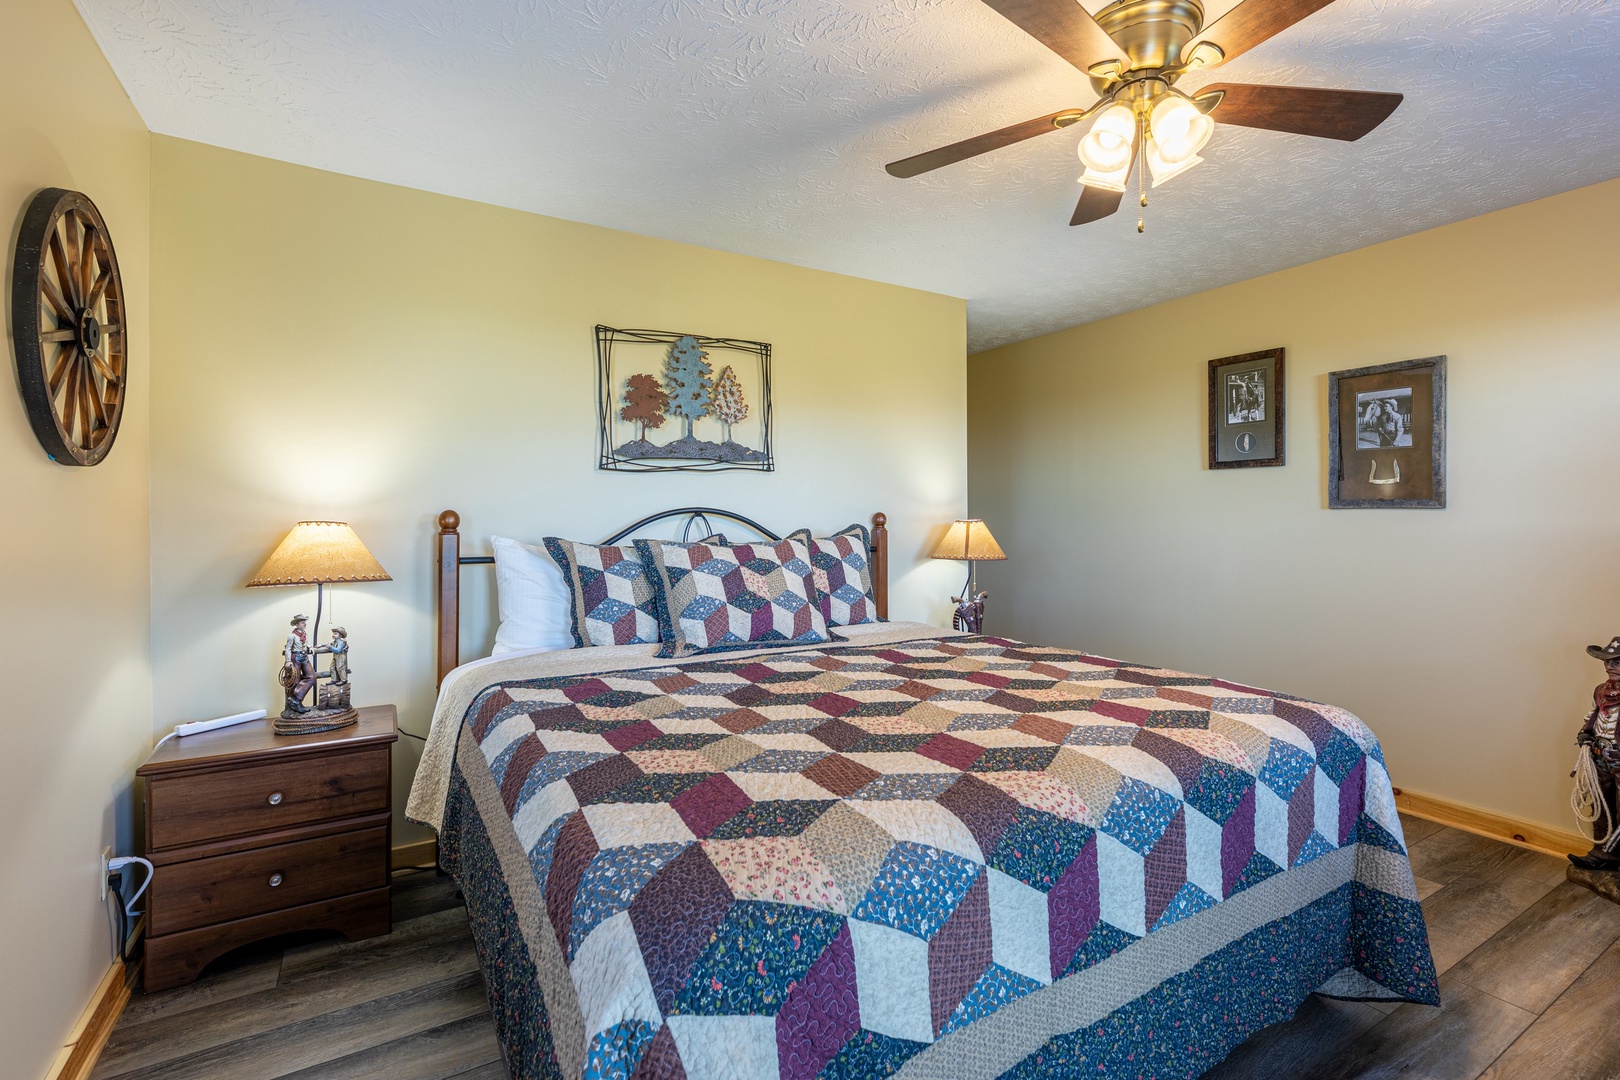 Bedroom with lamps at Le Bear Chalet, a 7 bedroom cabin rental located in Gatlinburg